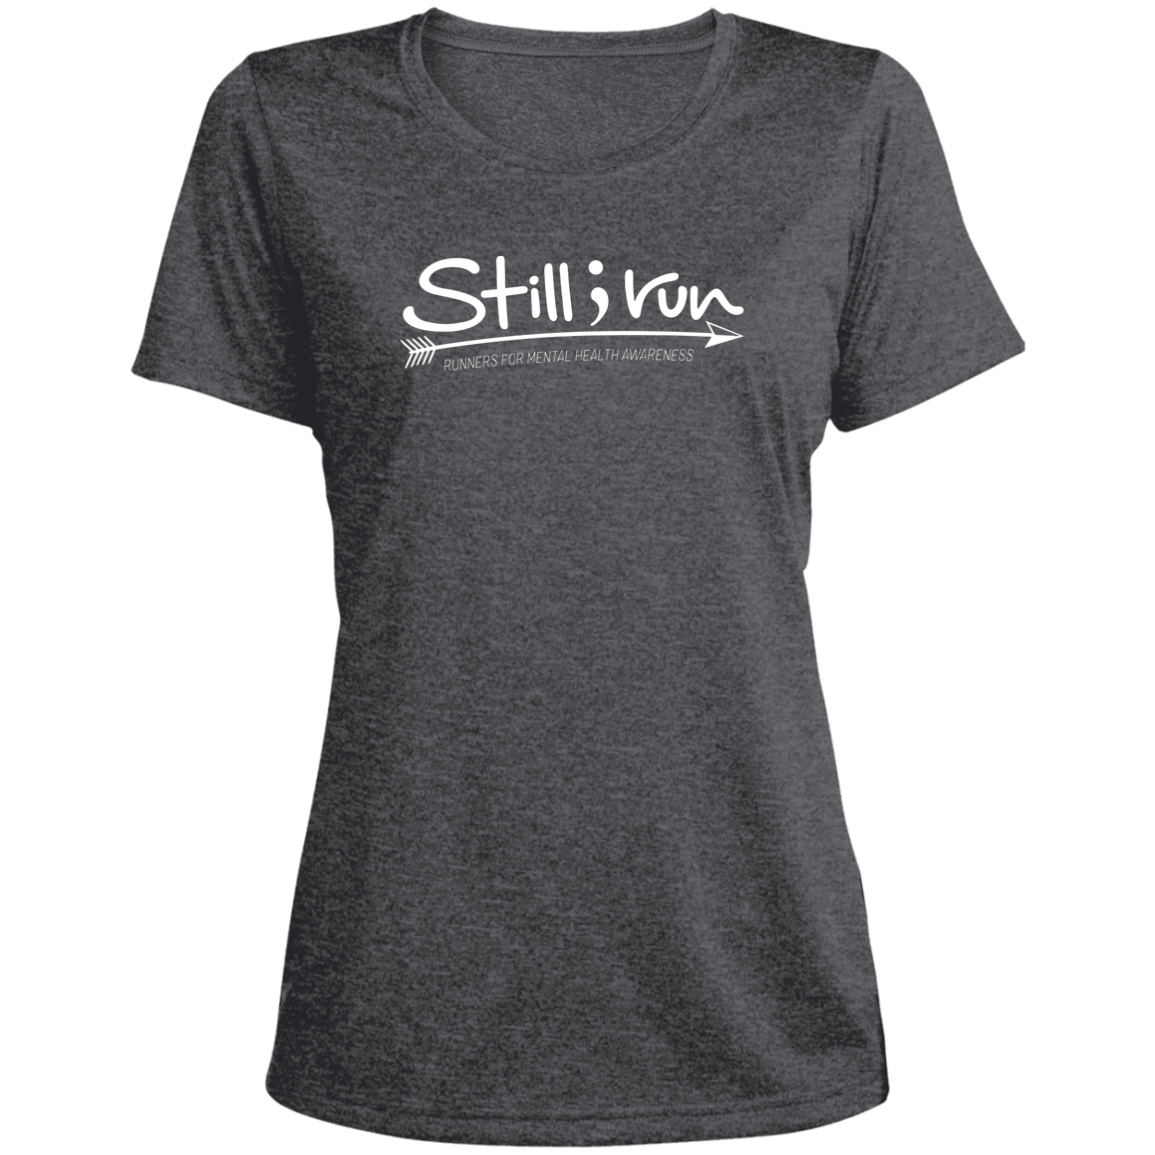 Still I Run - Fitted Heather Scoop Neck Performance Tee